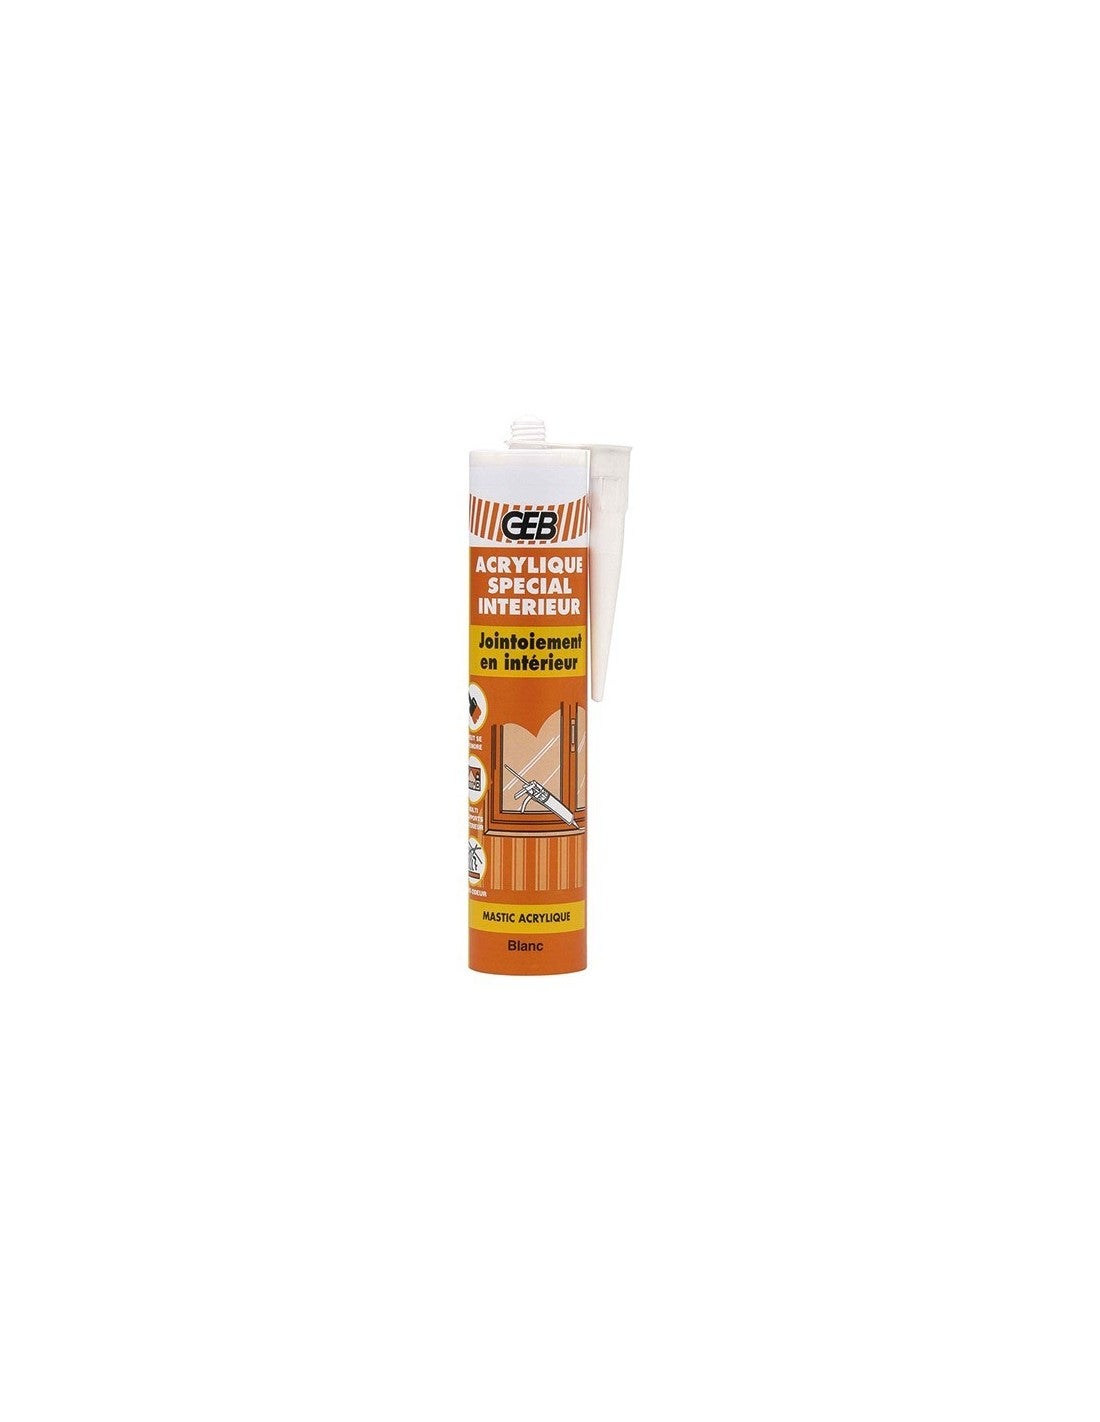 Mastic acrylique SIKA Sikaseal 107 Joint et fissure - Blanc - 300ml -  Espace Bricolage